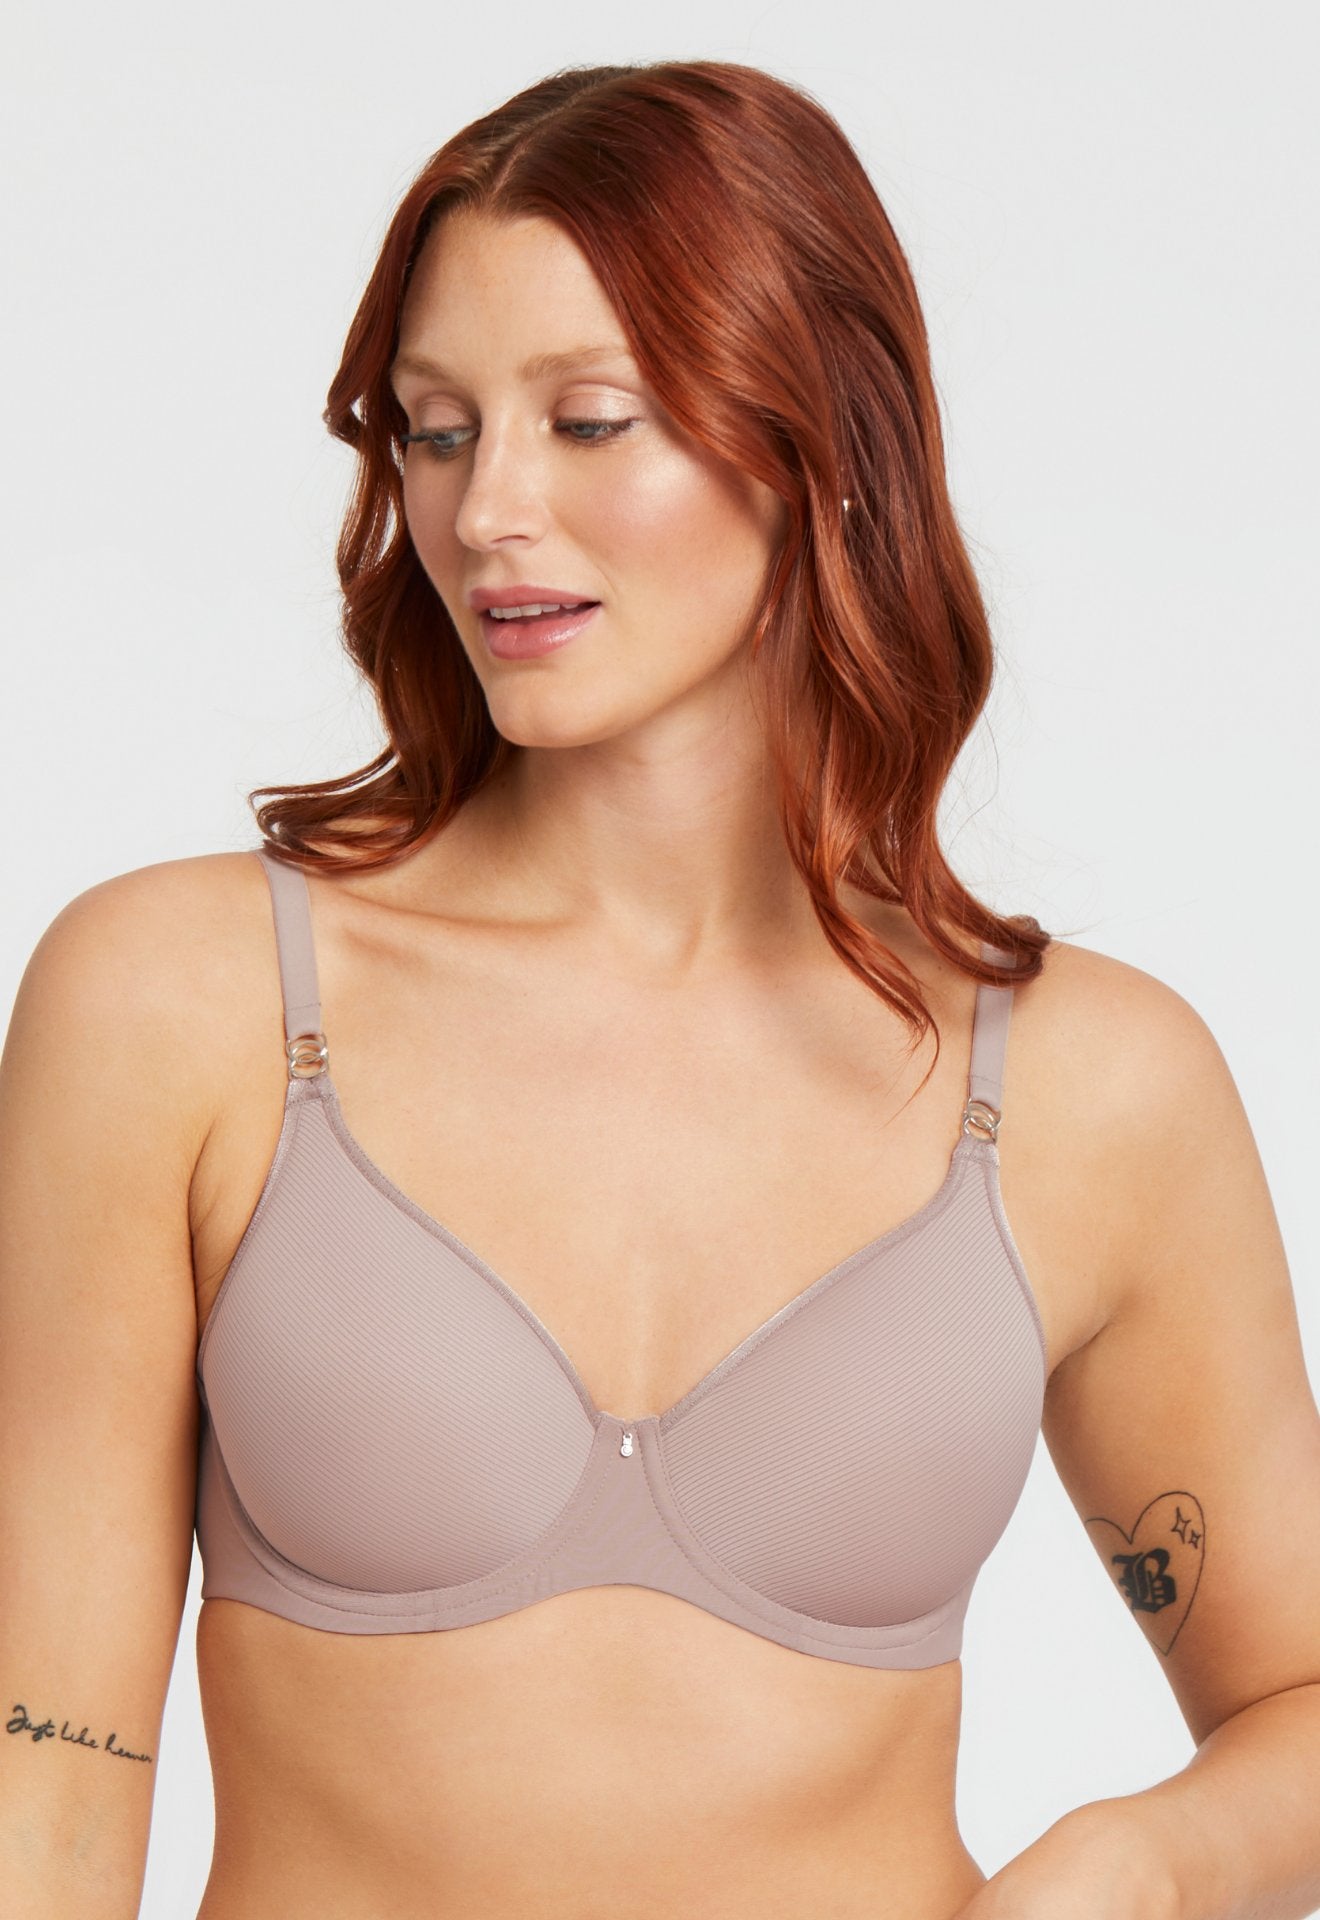 Womens Bras Manitoba  Bras for every occasion - Ce Soir Lingerie